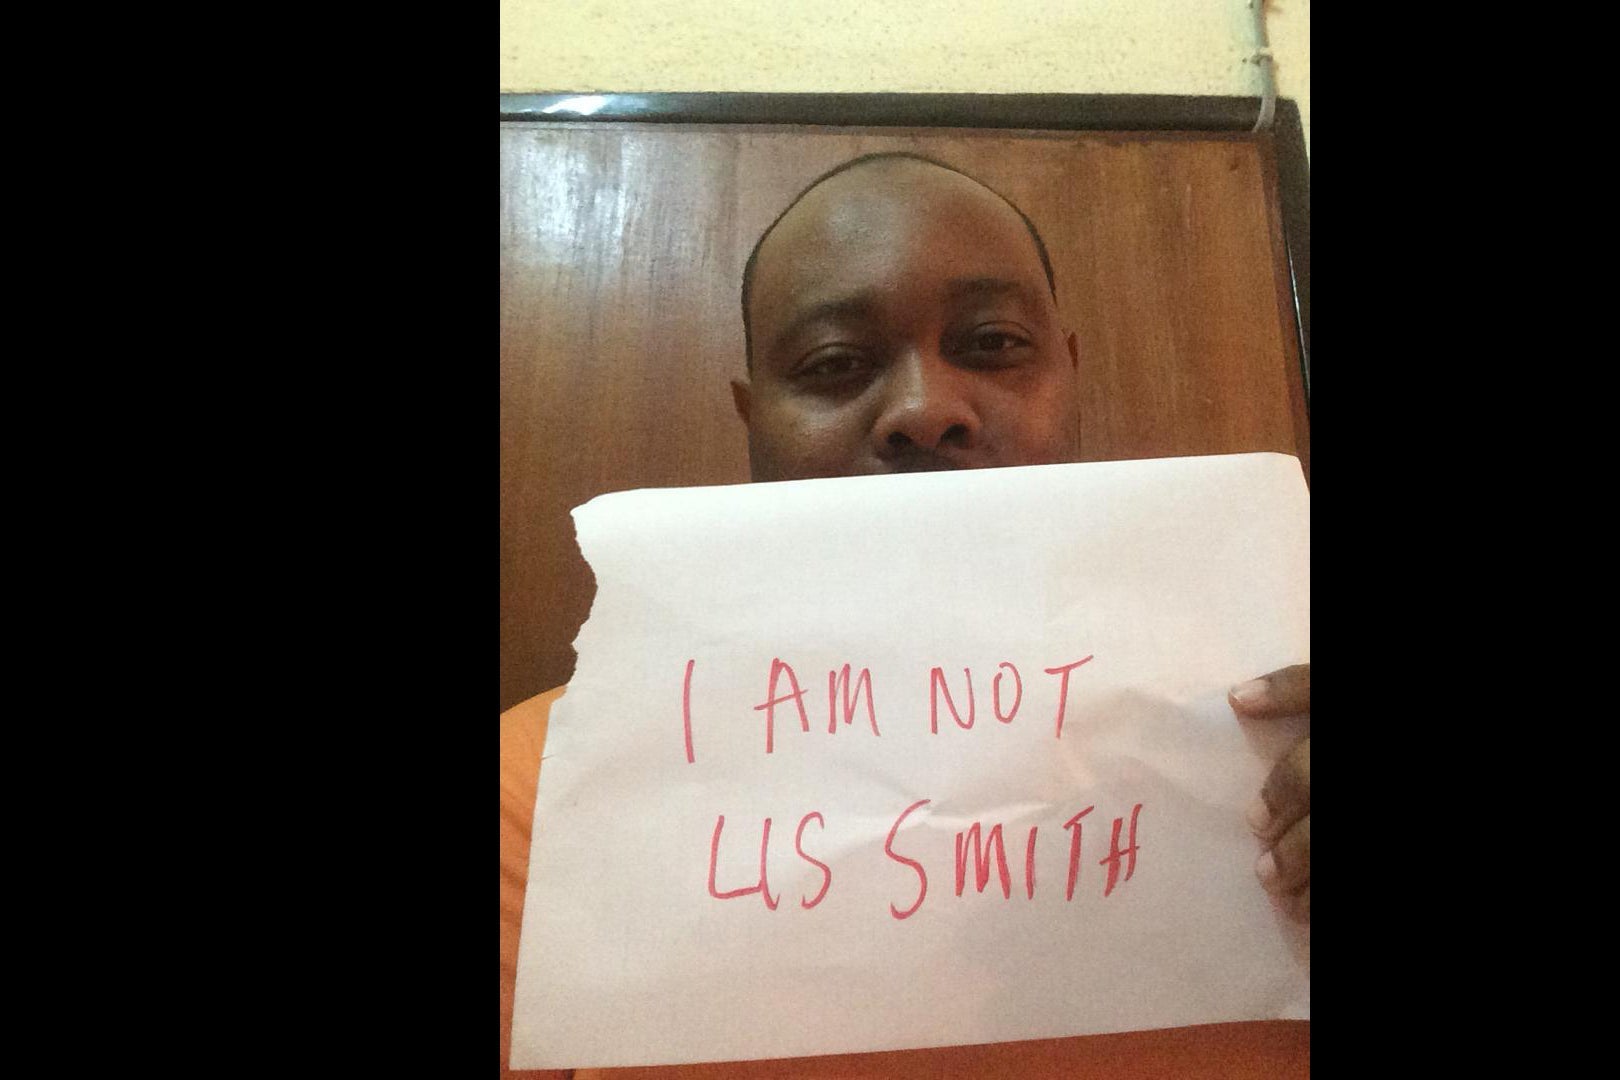 Chinedu holds up a piece of paper that reads "I am not Lis Smith"